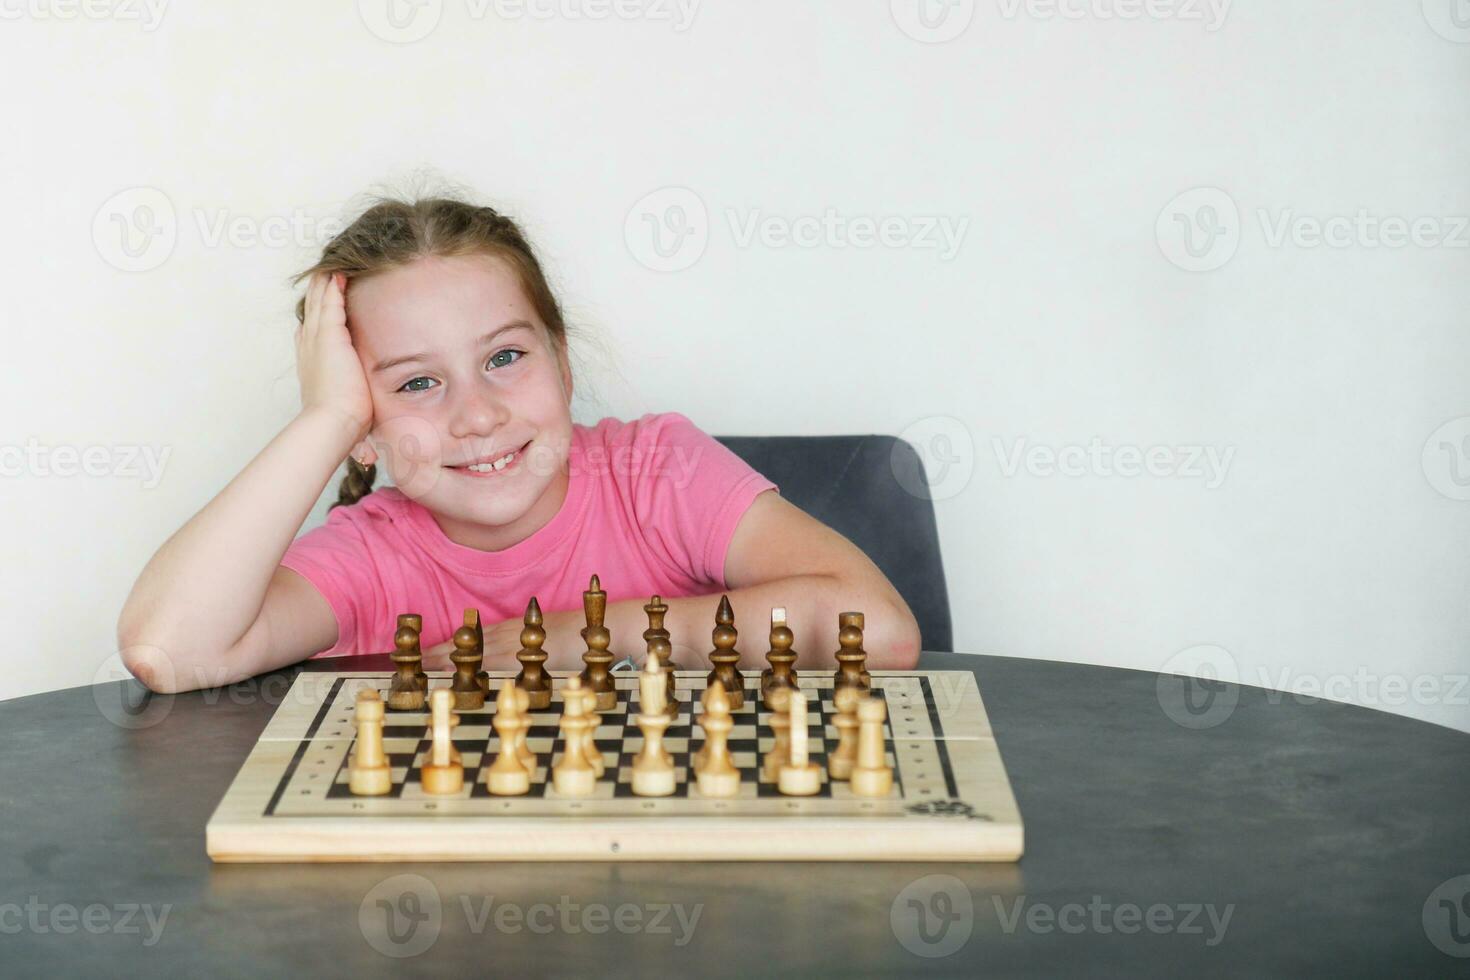 smiling girl in front of chess set out for play photo